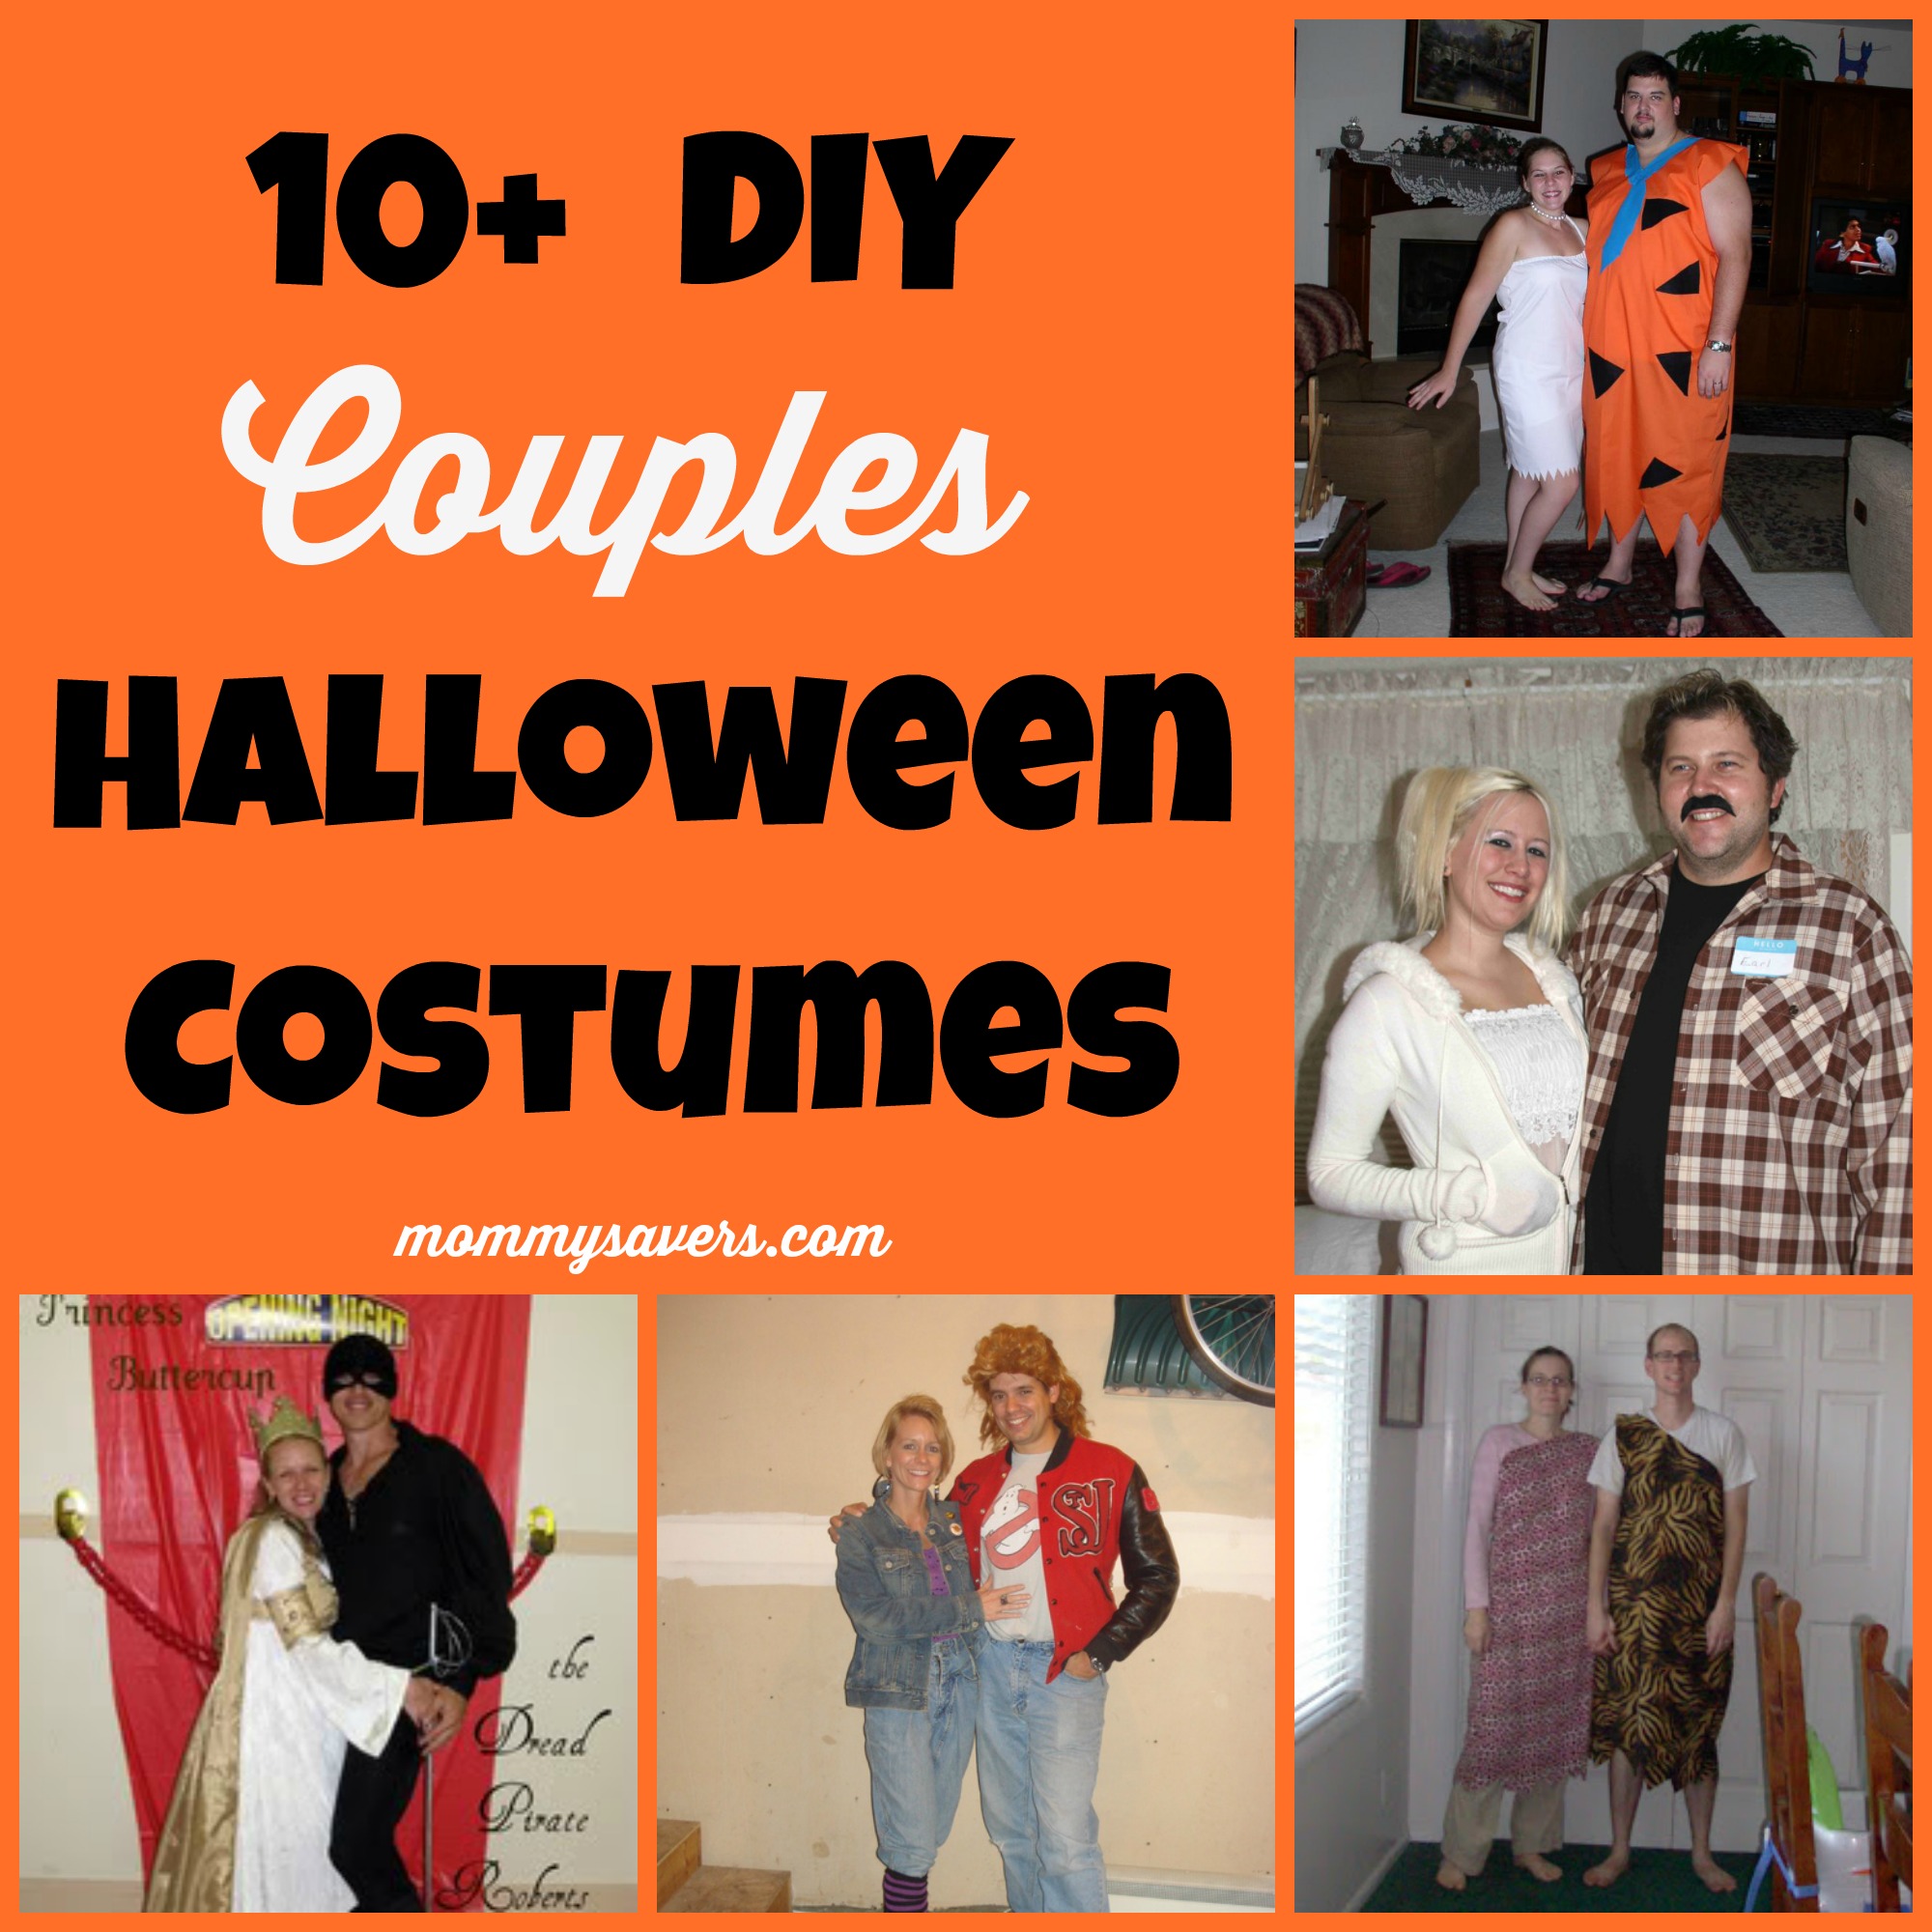 halloween costumes special fashion costumes  diy couples  couples projects occasions diy halloween diy